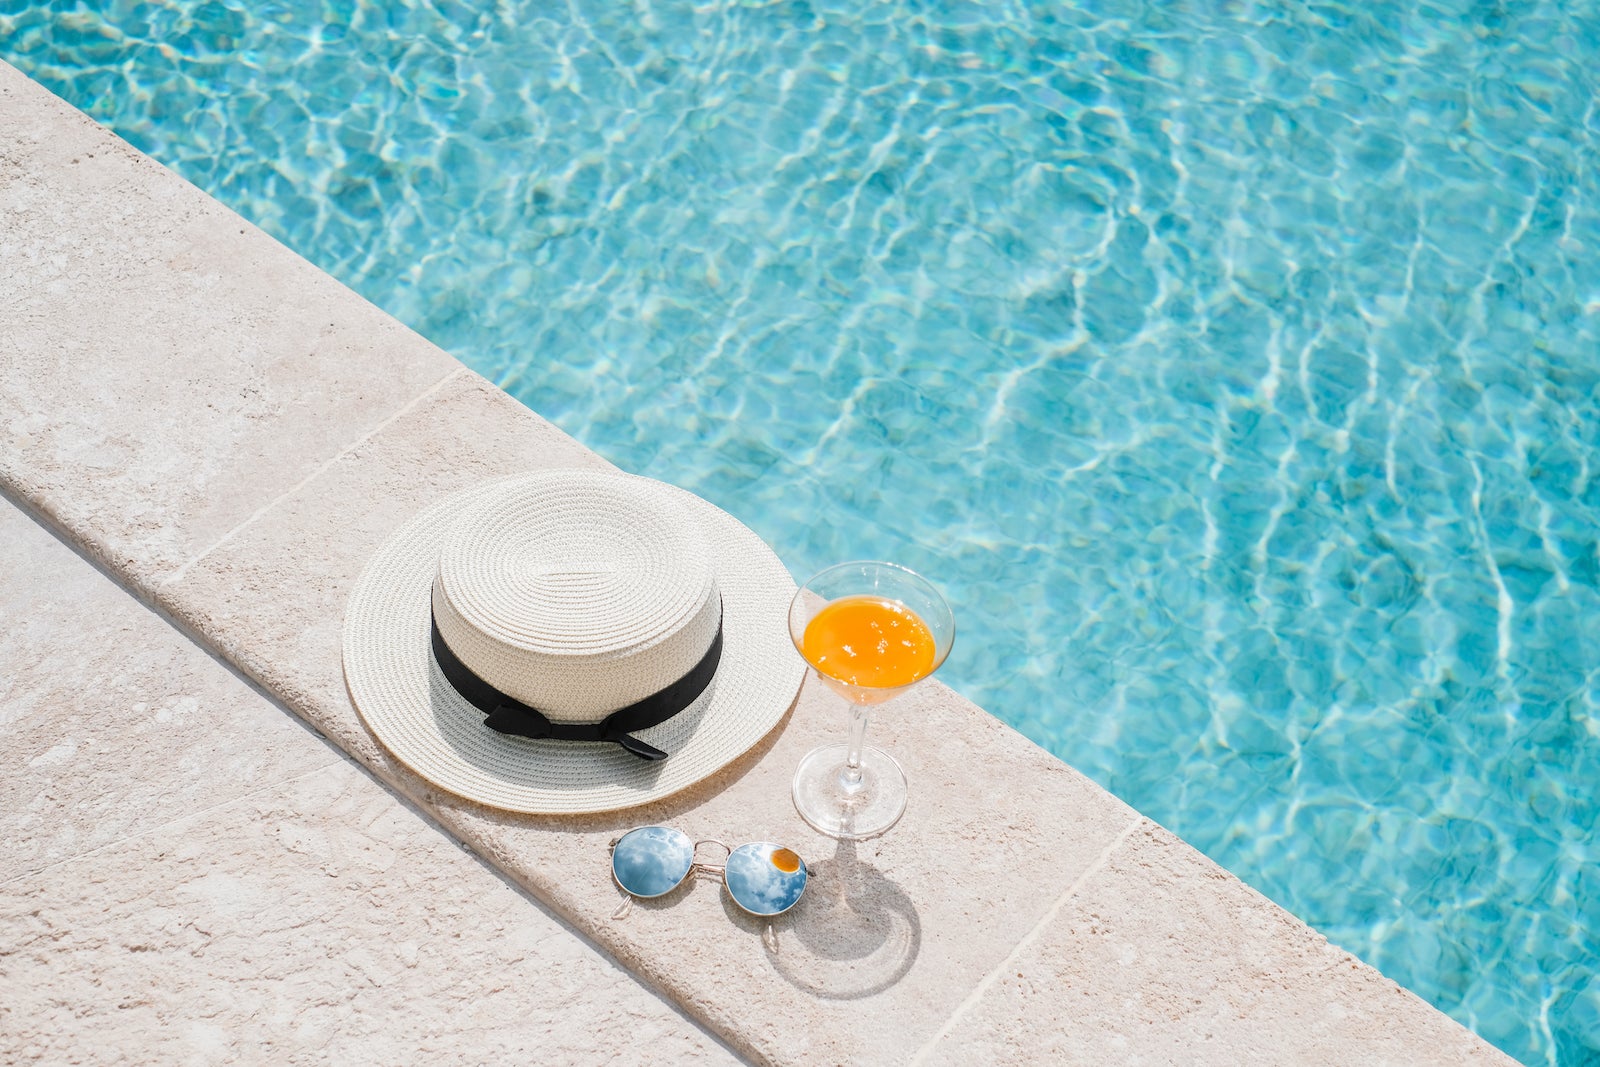 Fresh drink an orange juice, hat and glasses on the floor in front of pool in background in Koh Samui. Summer concept